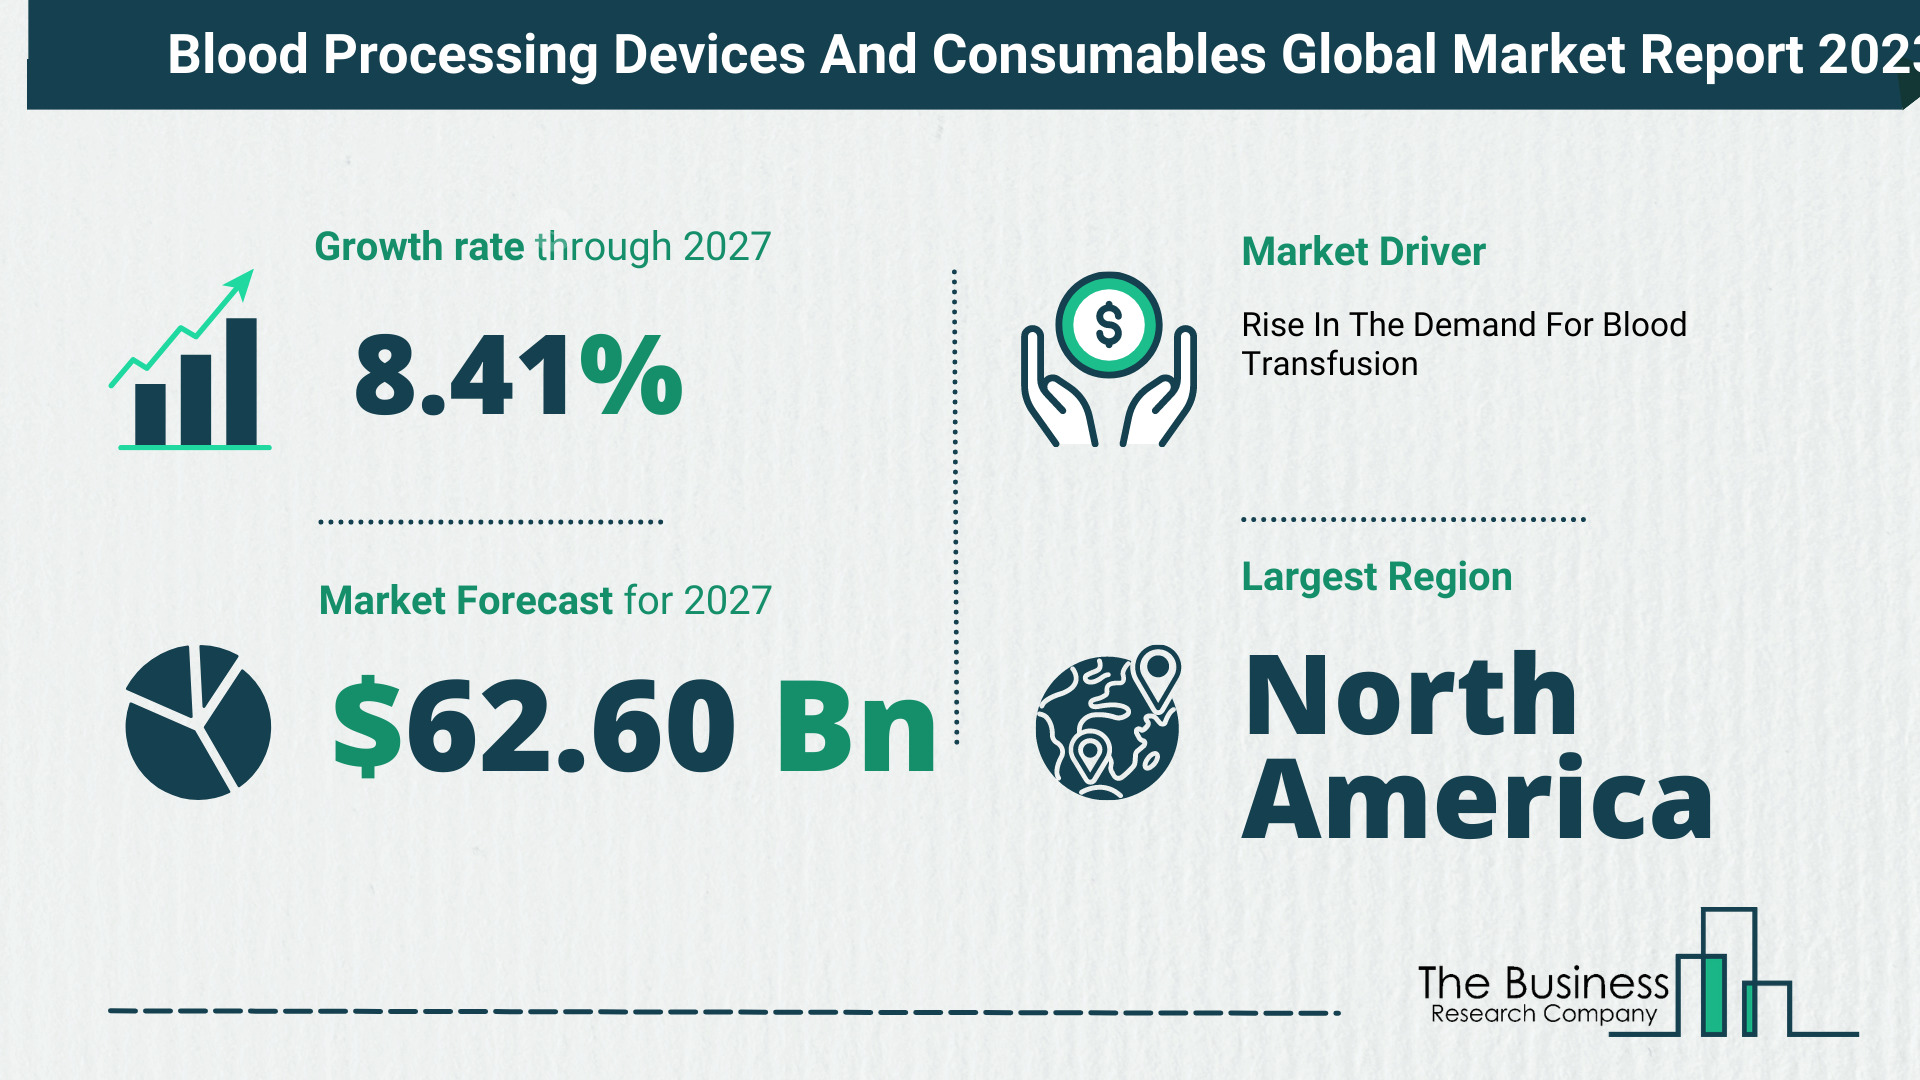 Global Blood Processing Devices And Consumables Market